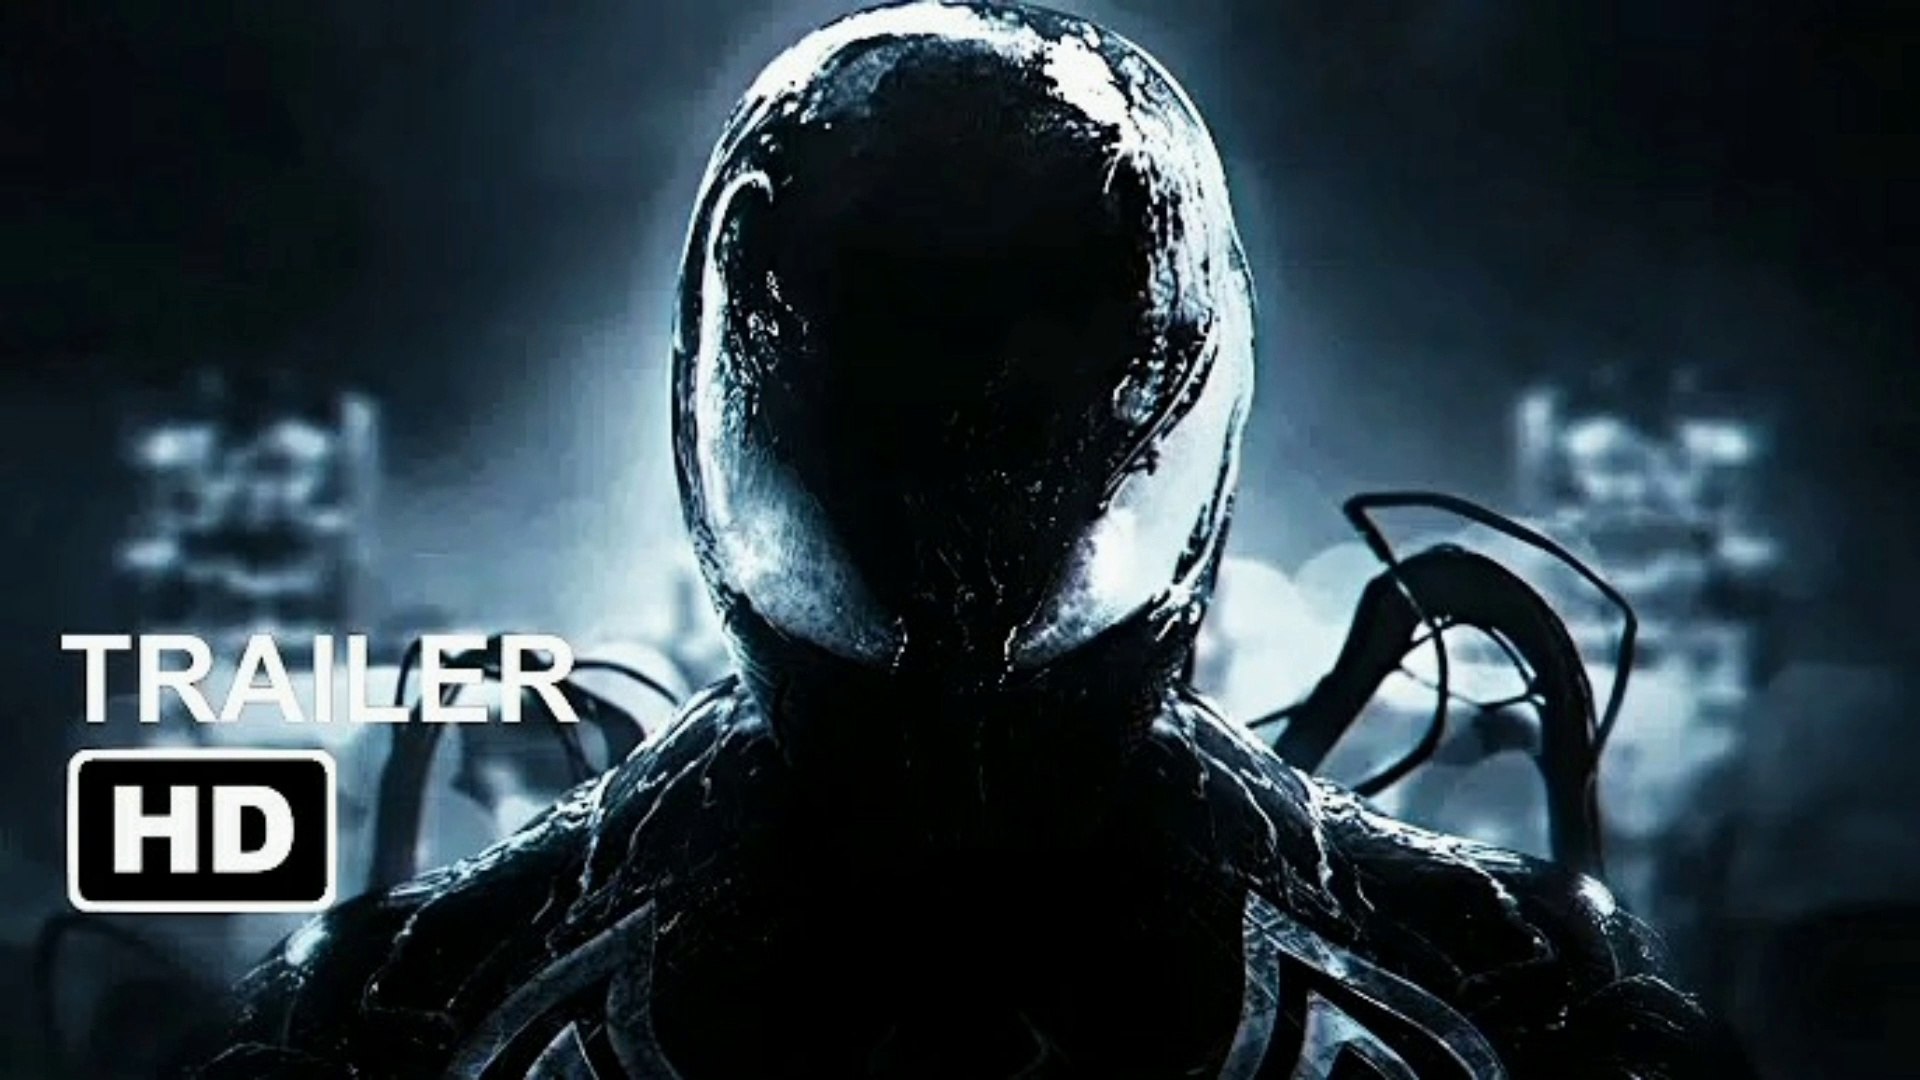 Venom 2 Let There Be Carnage Trailer 1 2021 Tom Hardy Woody Harellson Video Dailymotion